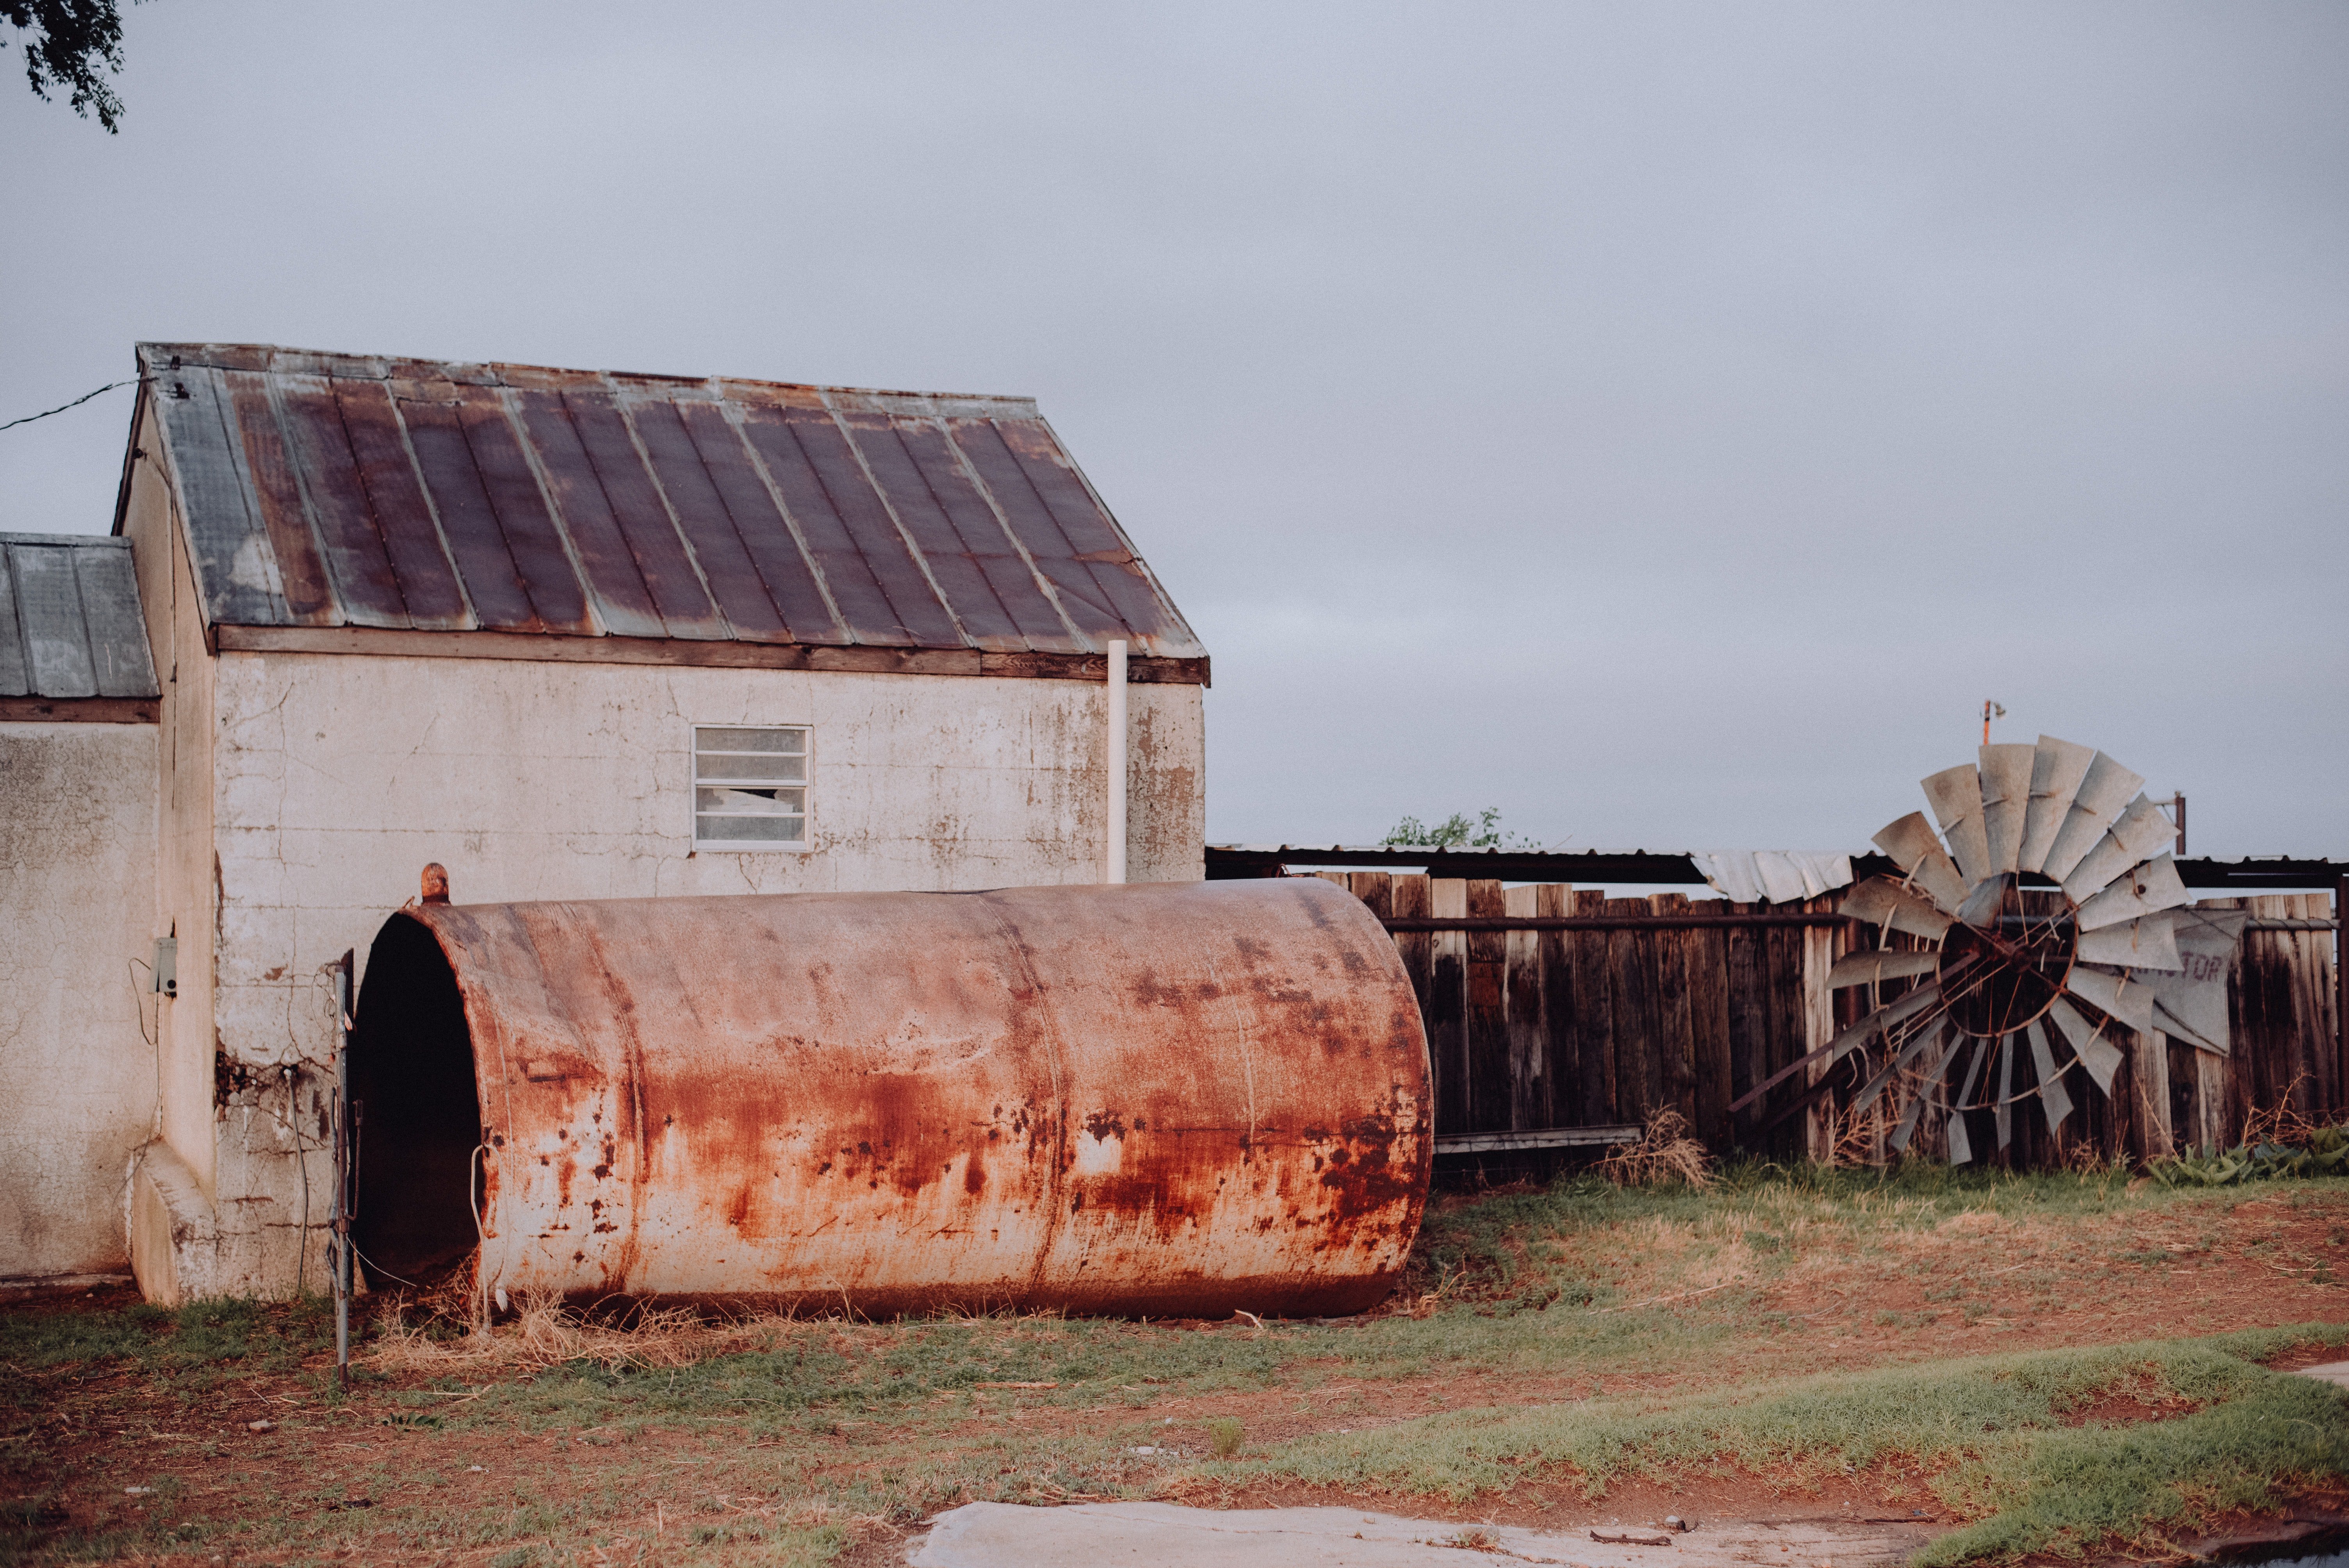 Billy and his parents were living in dire conditions. | Source: Unsplash